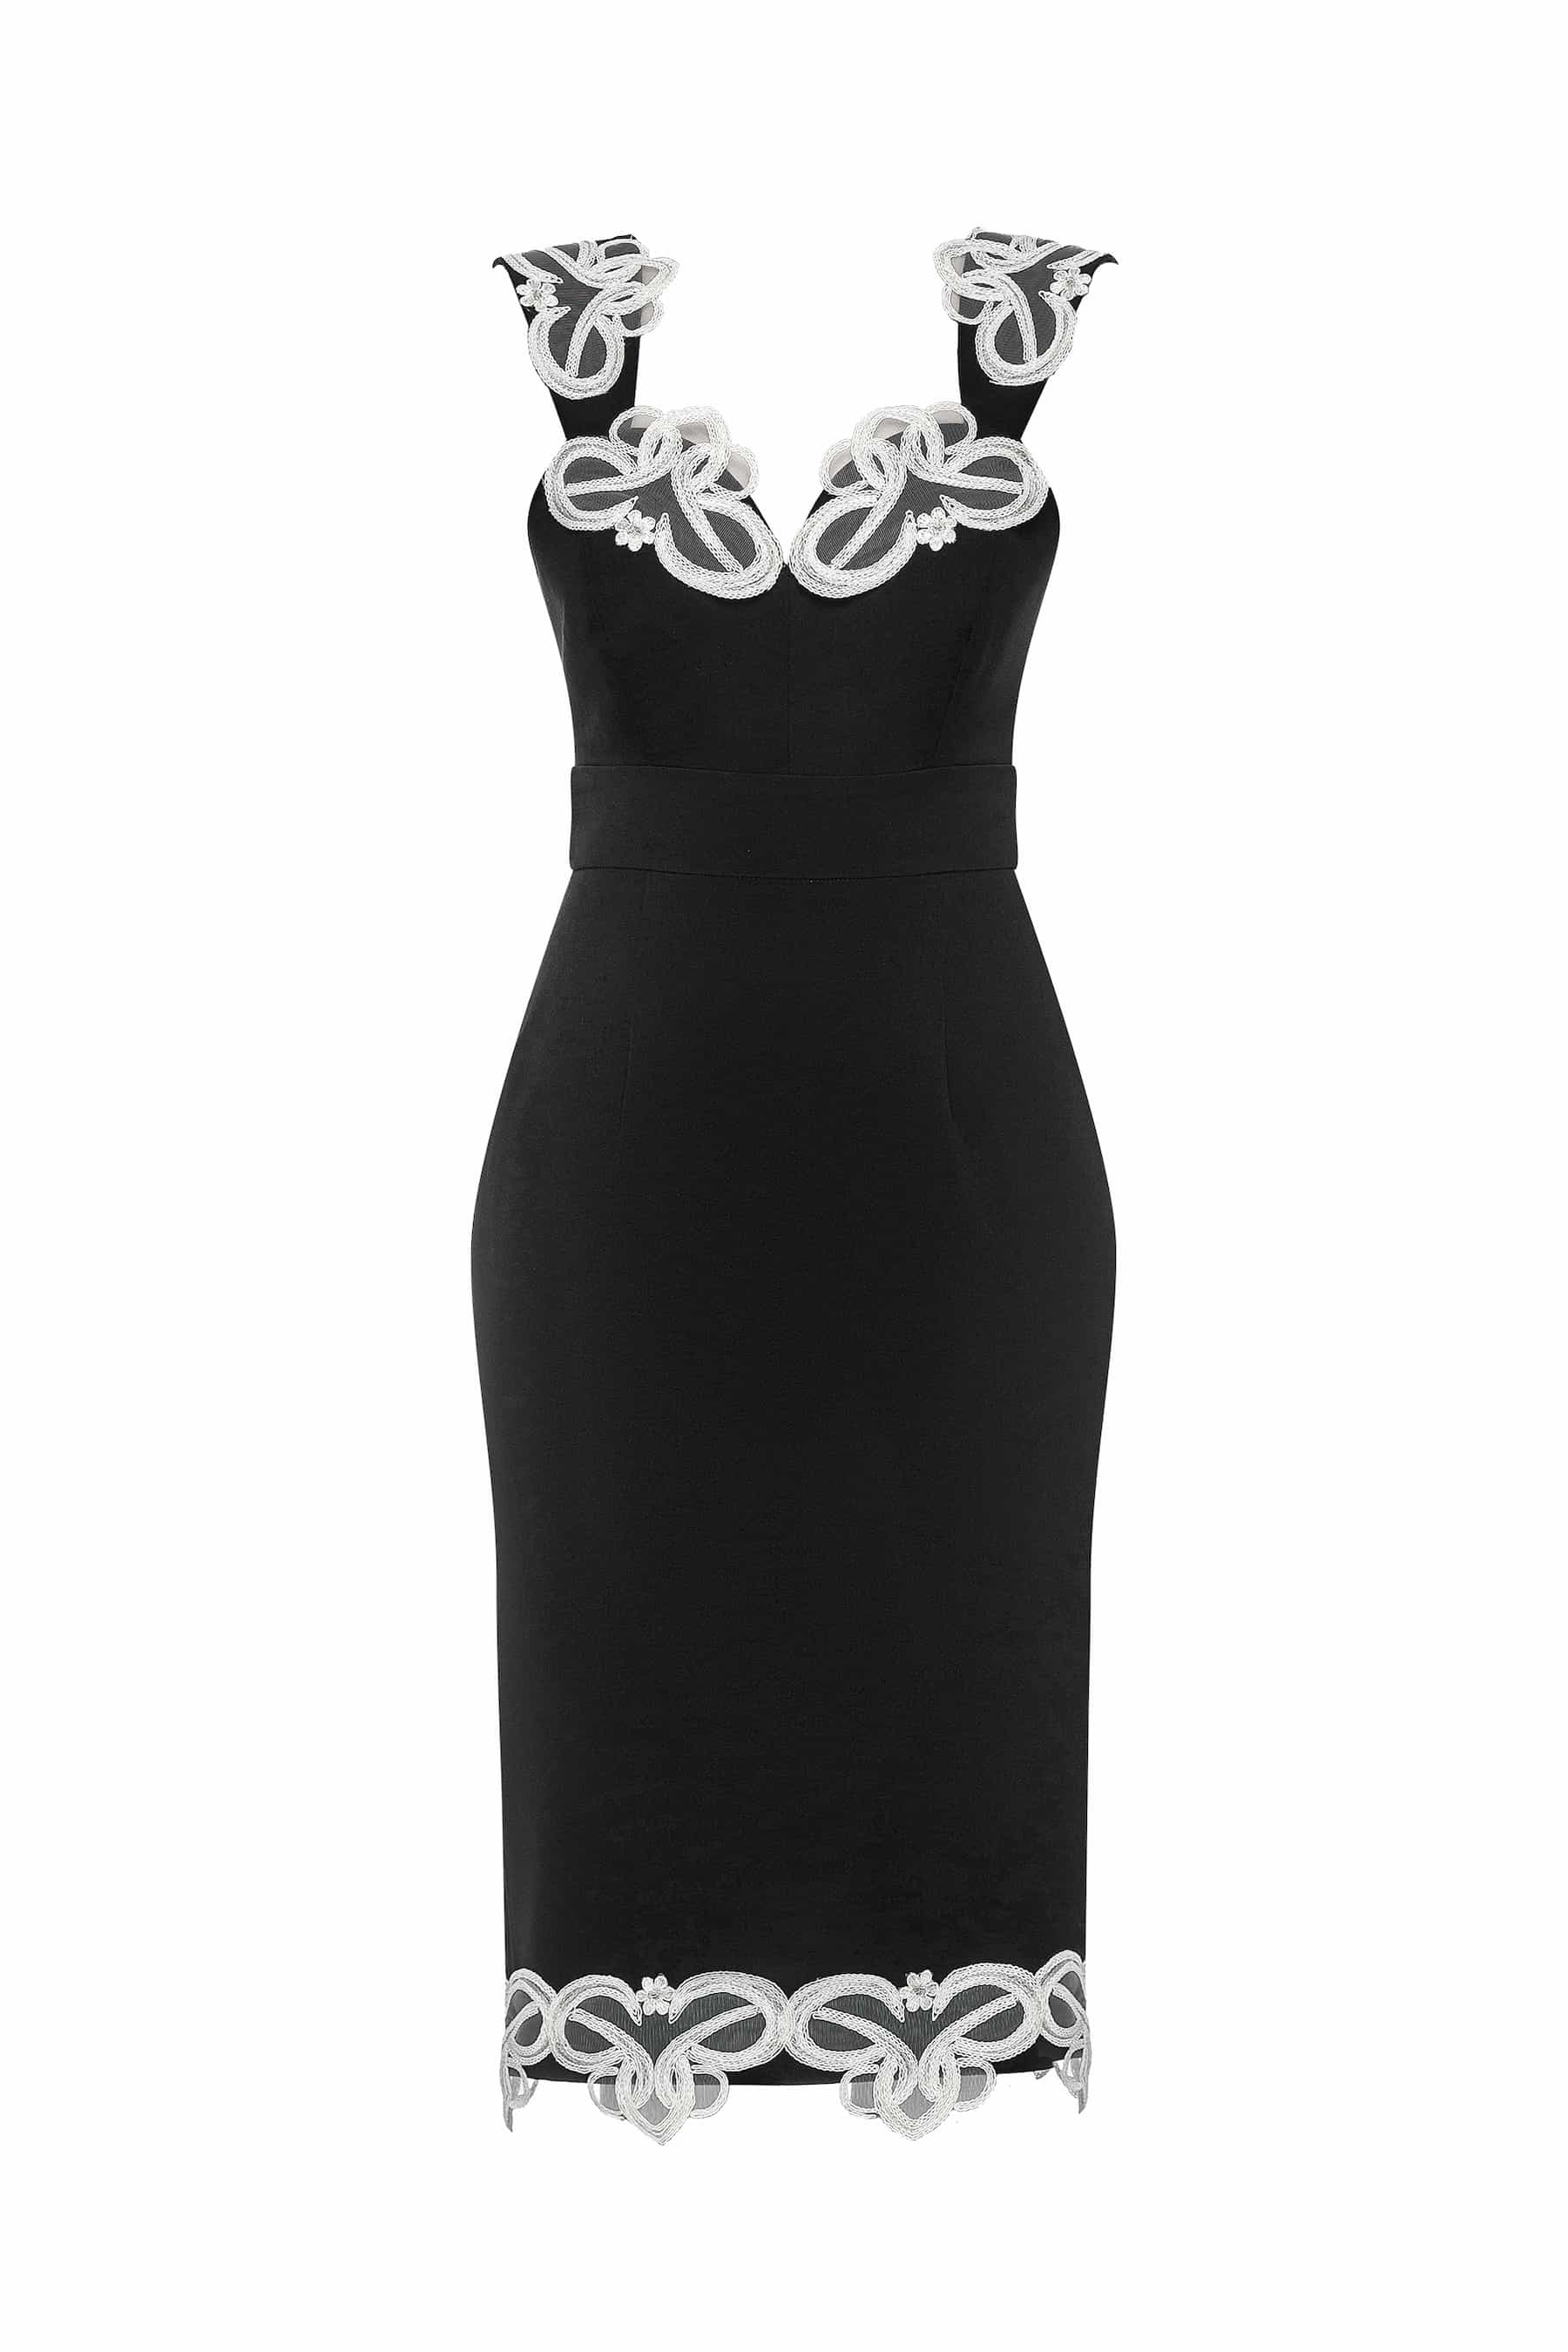 Black sheath dress with floral lace